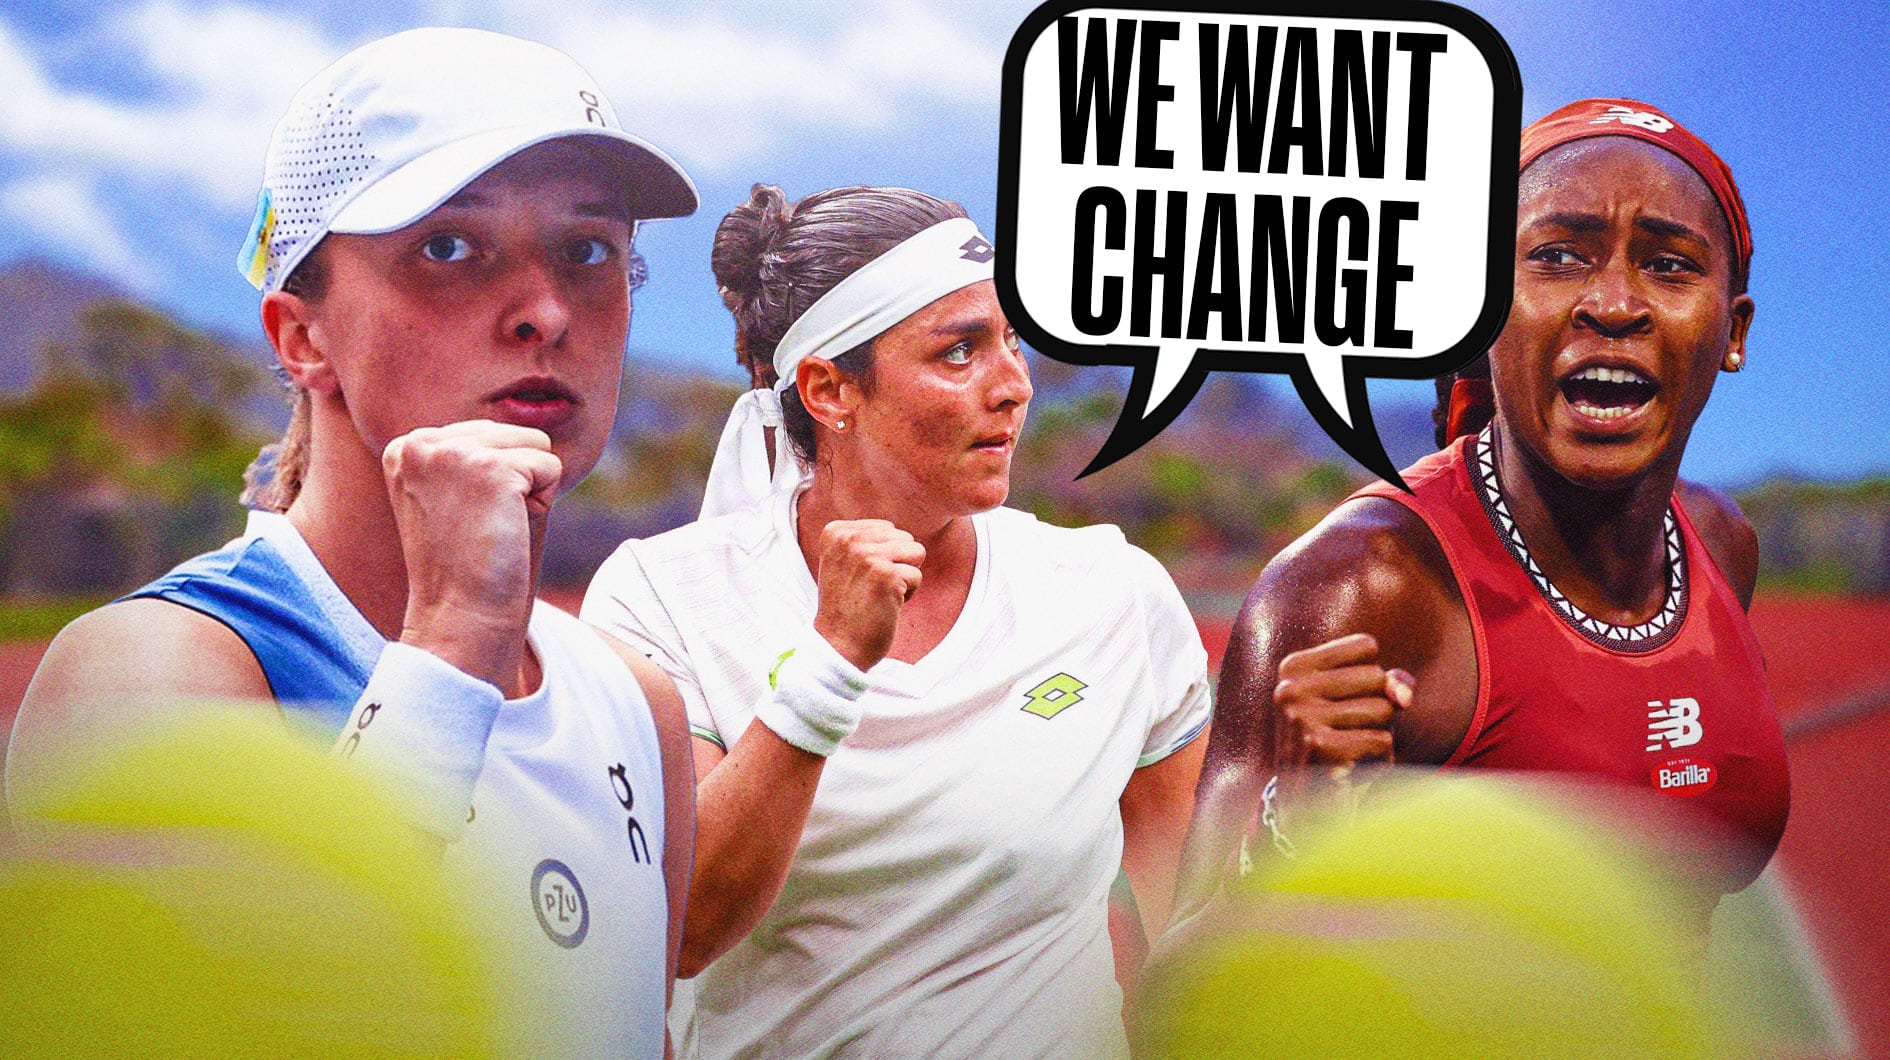 WTA players Iga Swiatek, Coco Gauff and Ons Jabeur on a tennis court with a text bubble above them saying “We want change